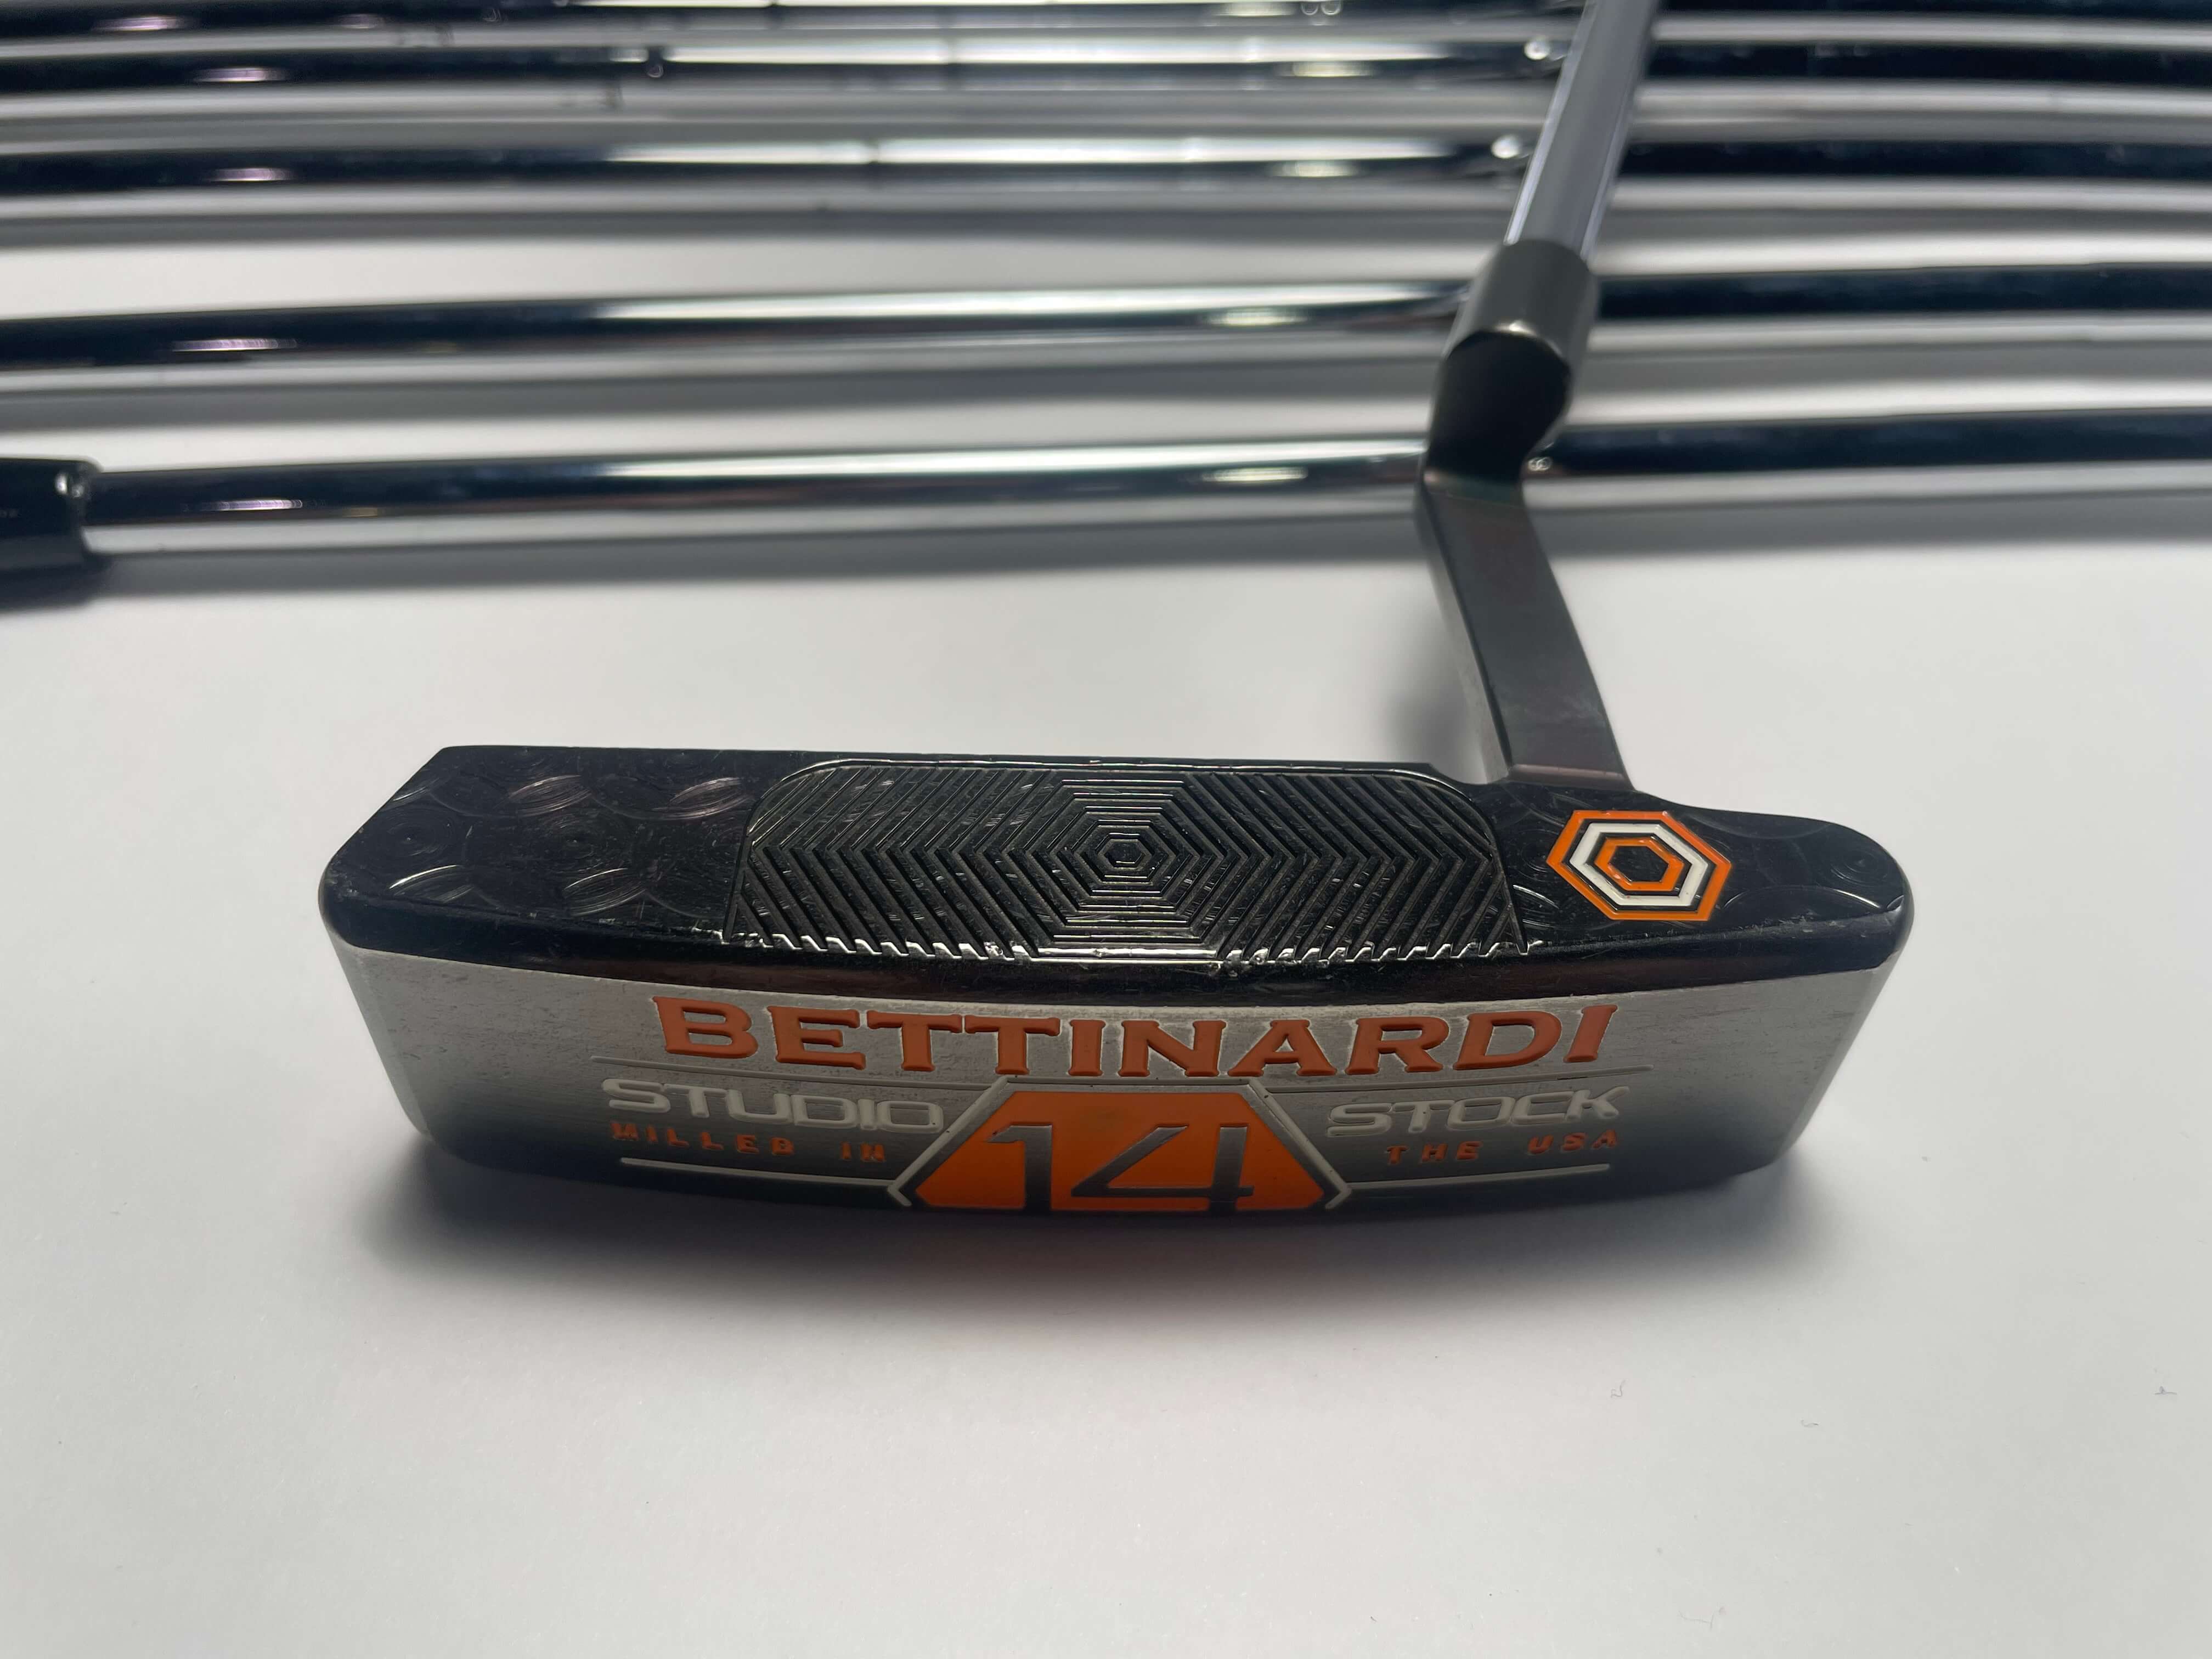 Picture of a putter.